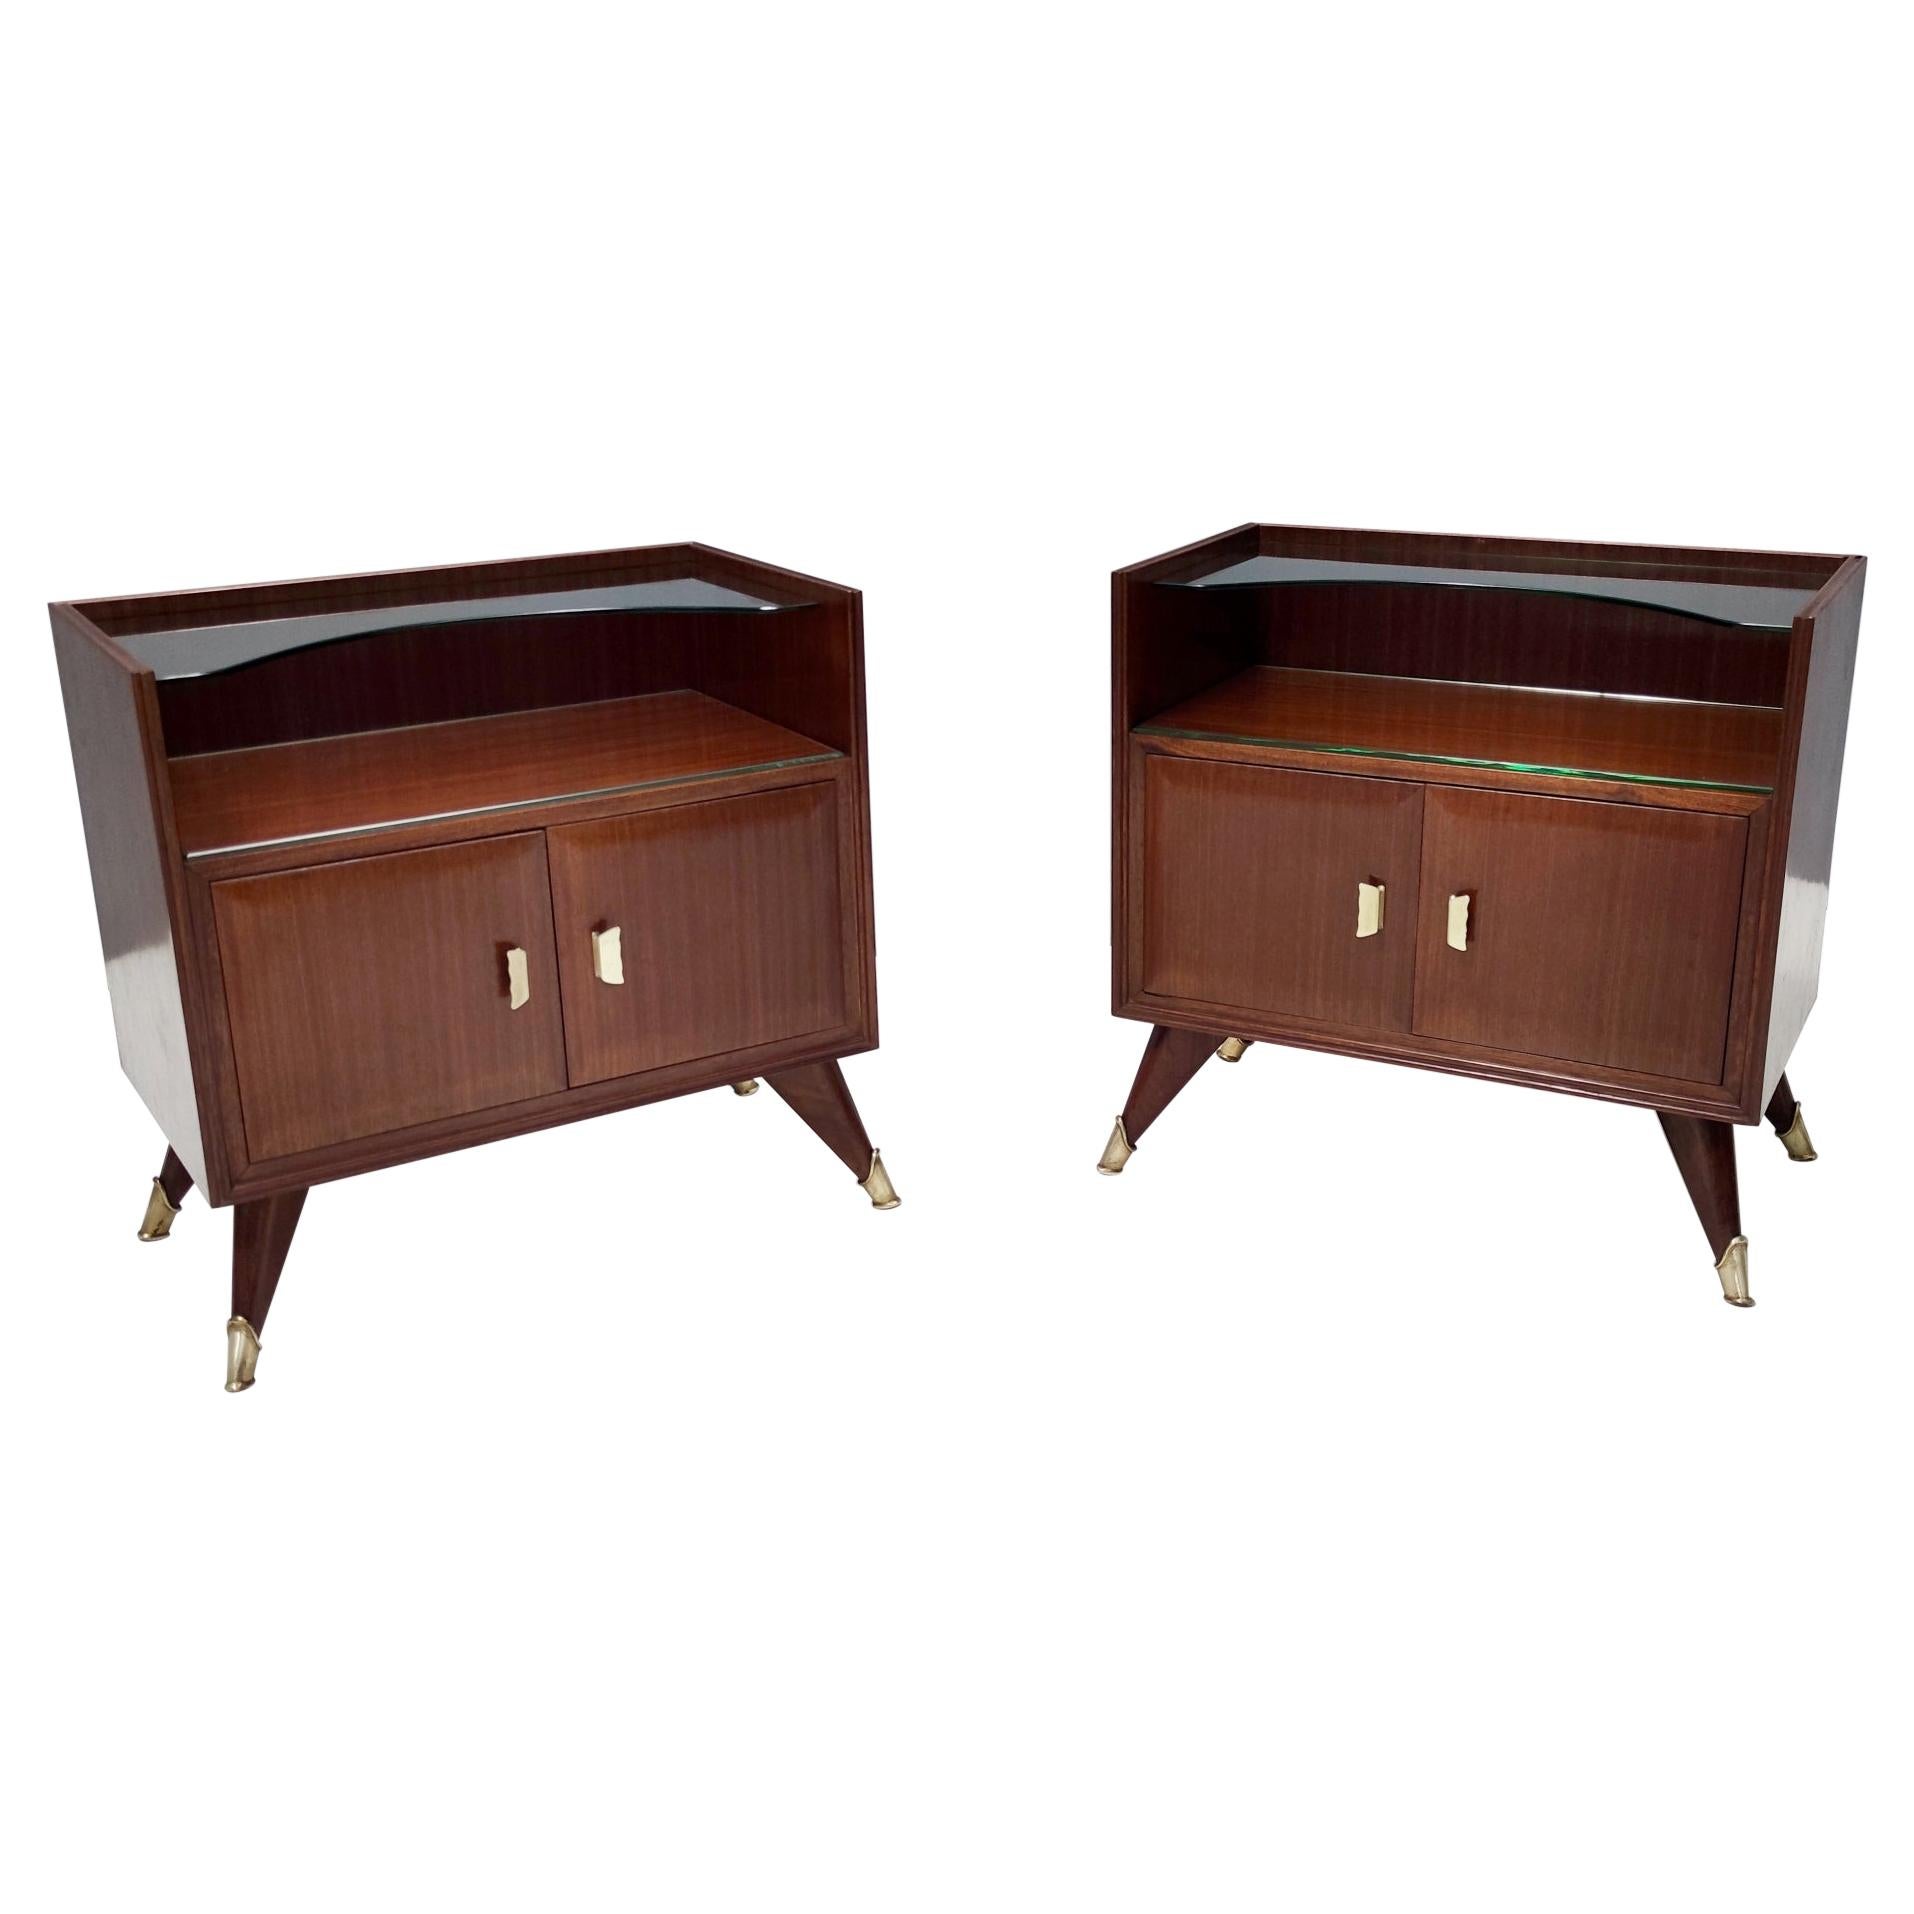 Pair of Vintage Elegant Wooden Nightstands with a Crystal Top Shelf For Sale